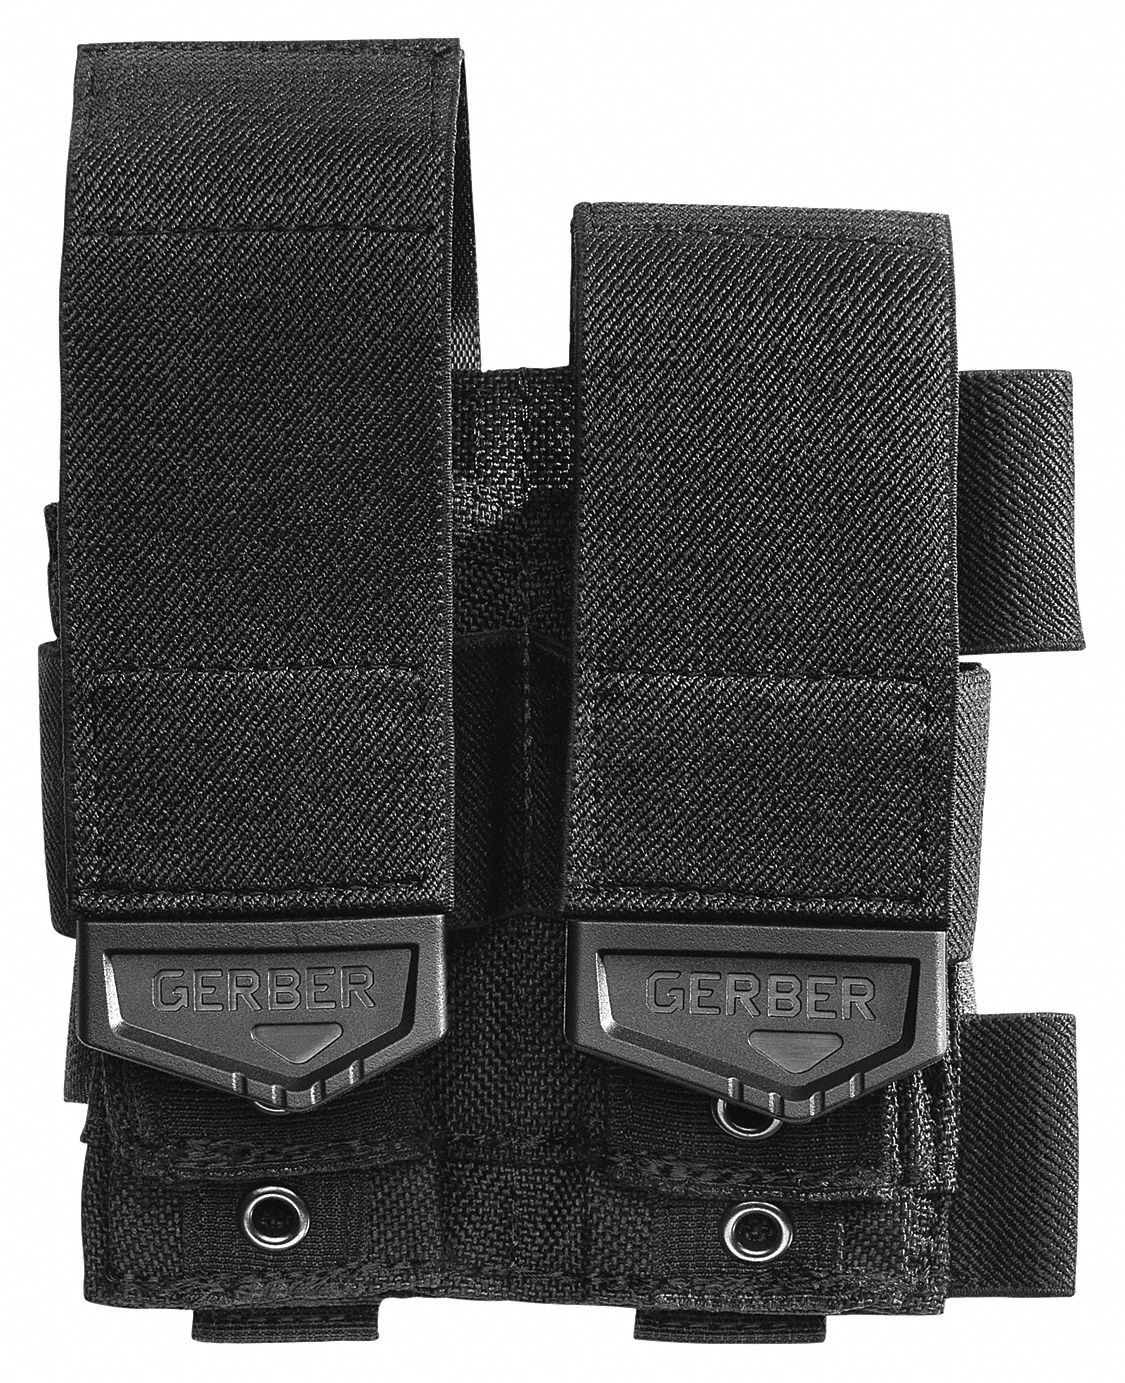 GERBER, 5 Pockets, Compatible with Folding Knife/Hand Held